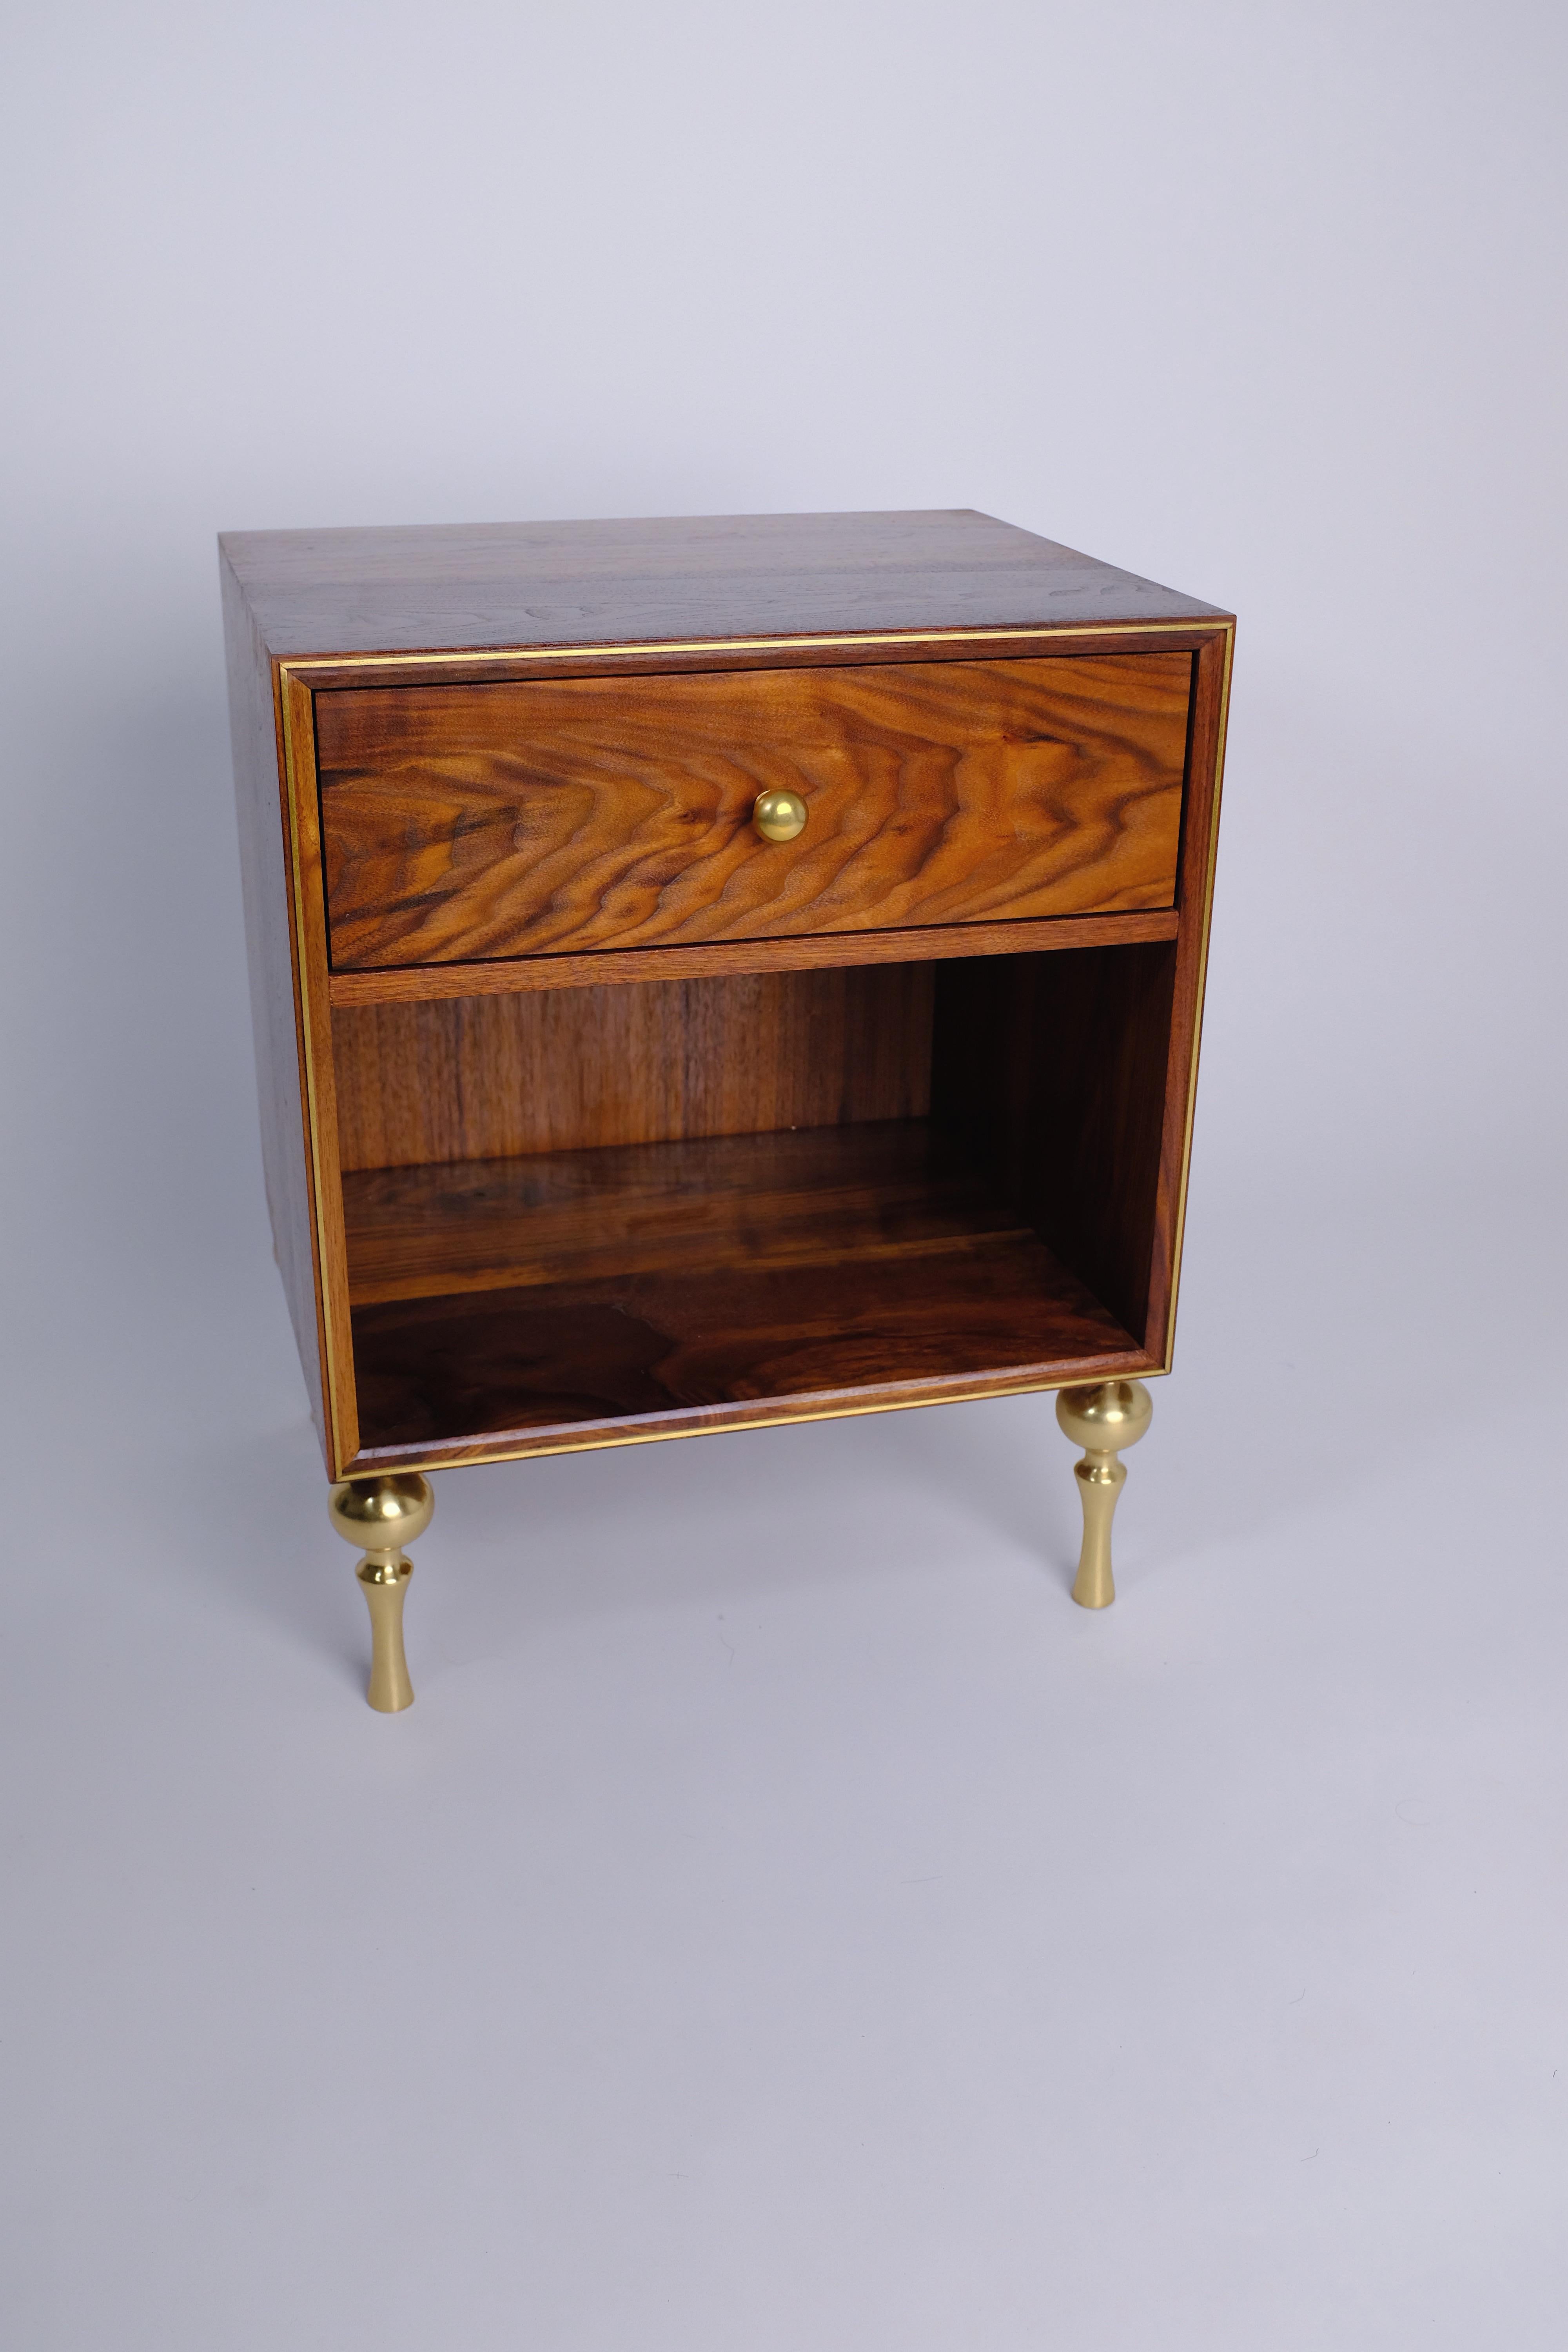 Nightstands pictured in oiled walnut, and polished brass inlay and polished brass legs to match. Drawer made in solid white oak.